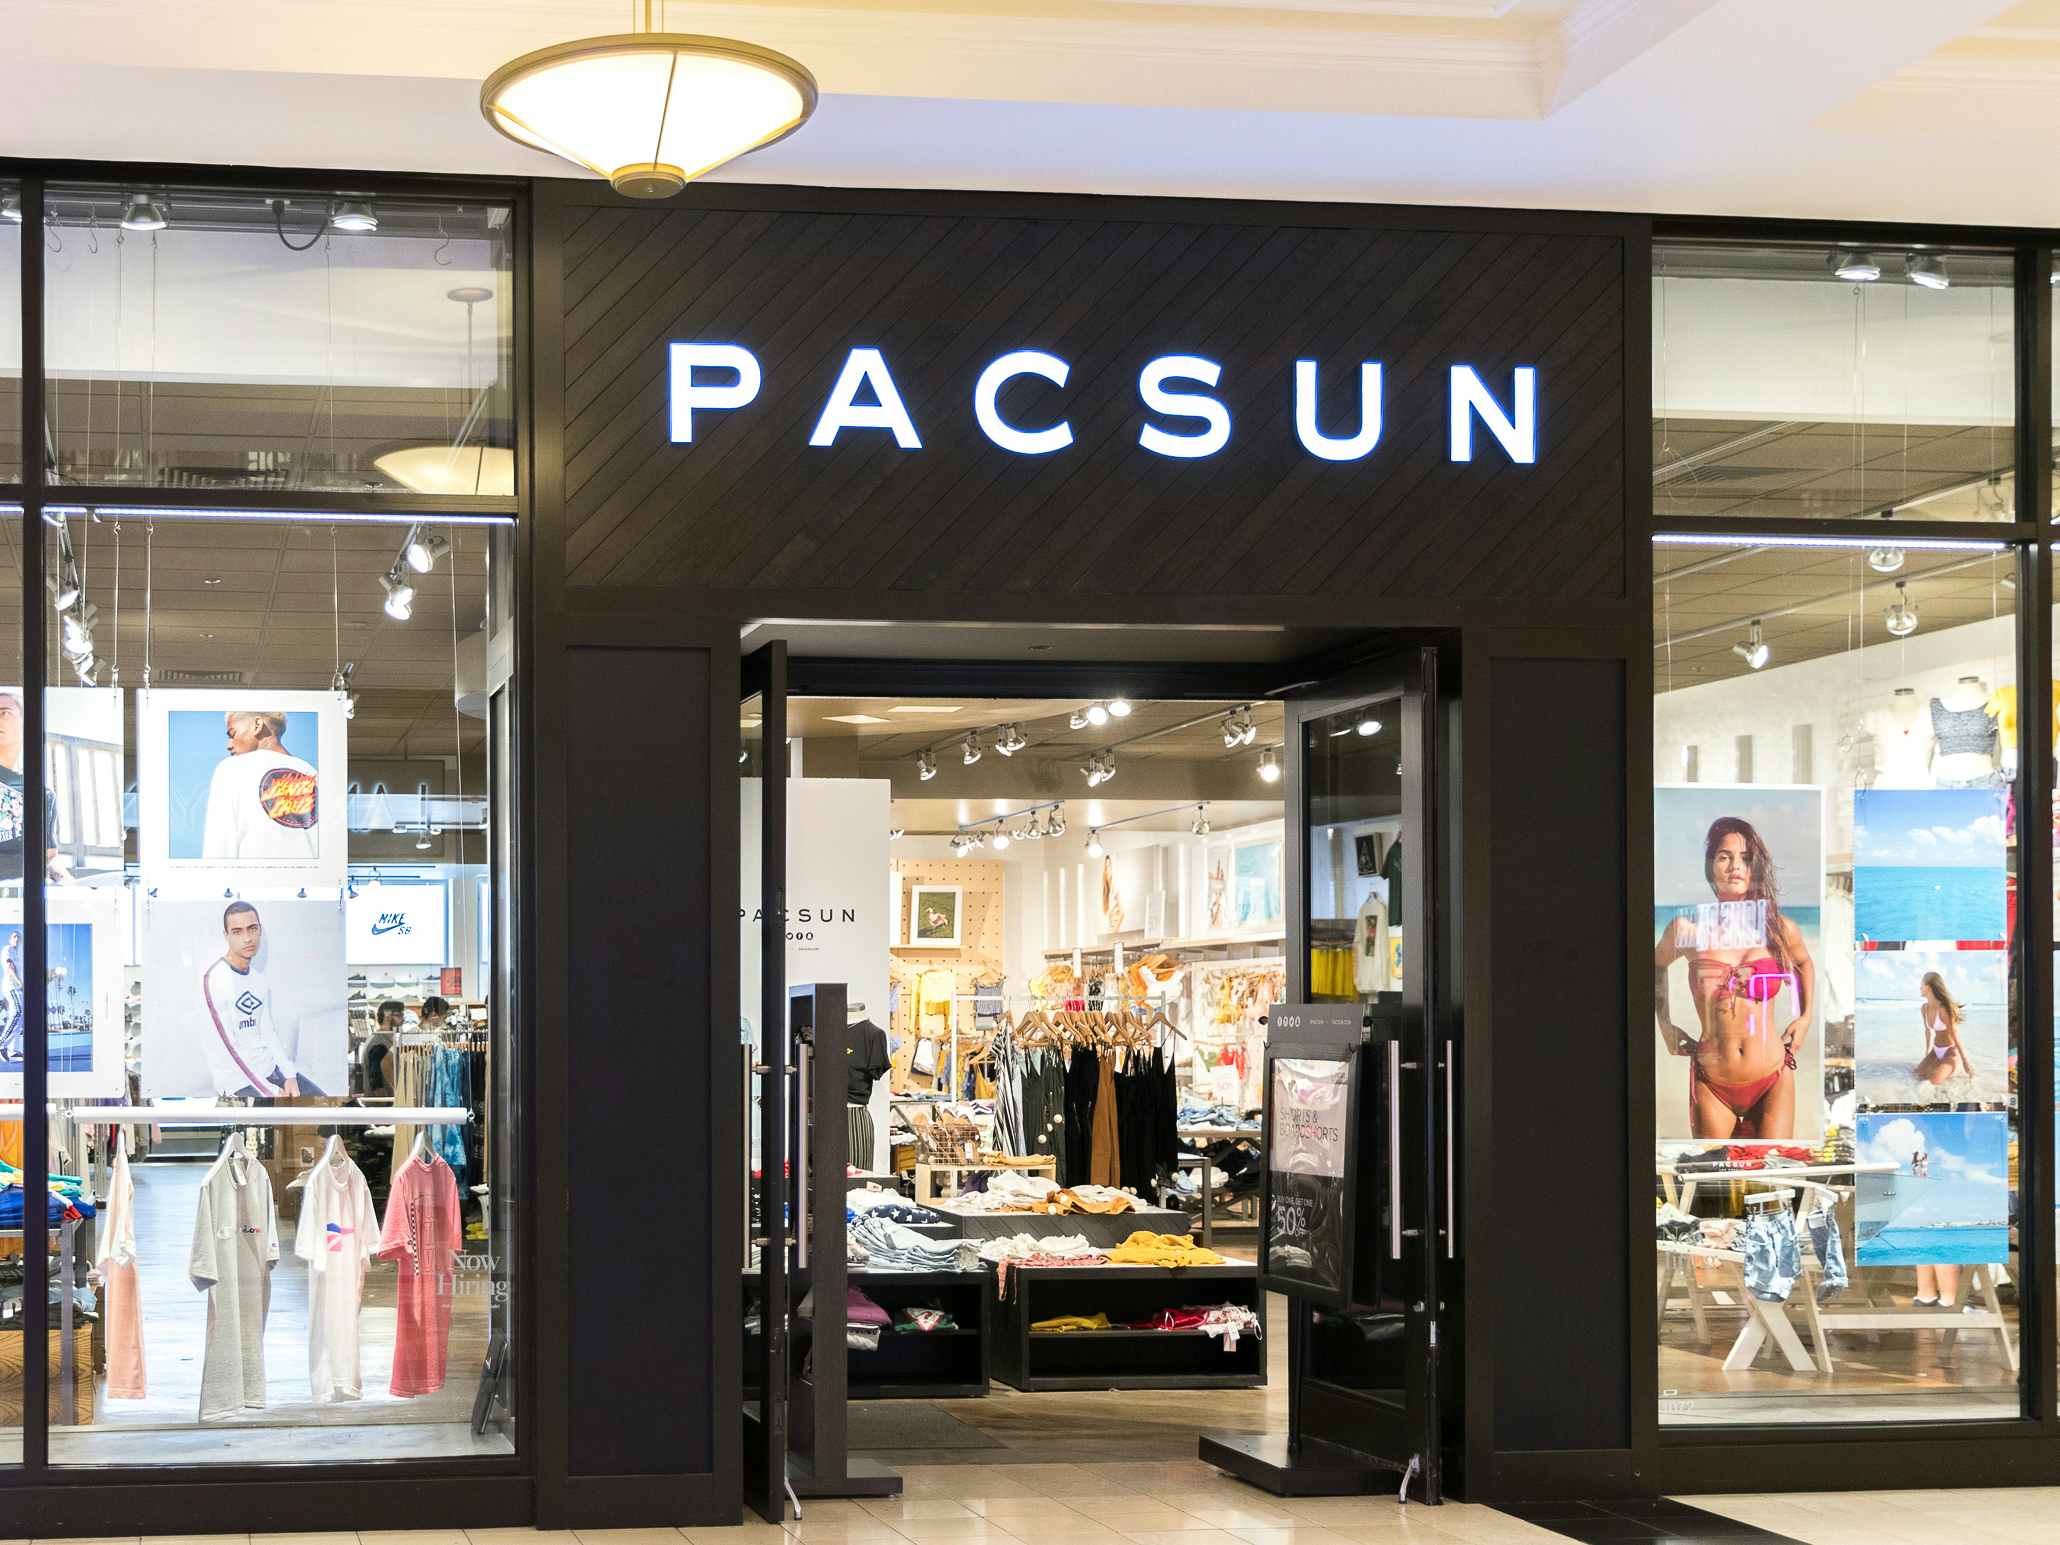 A PacSun store front in a mall